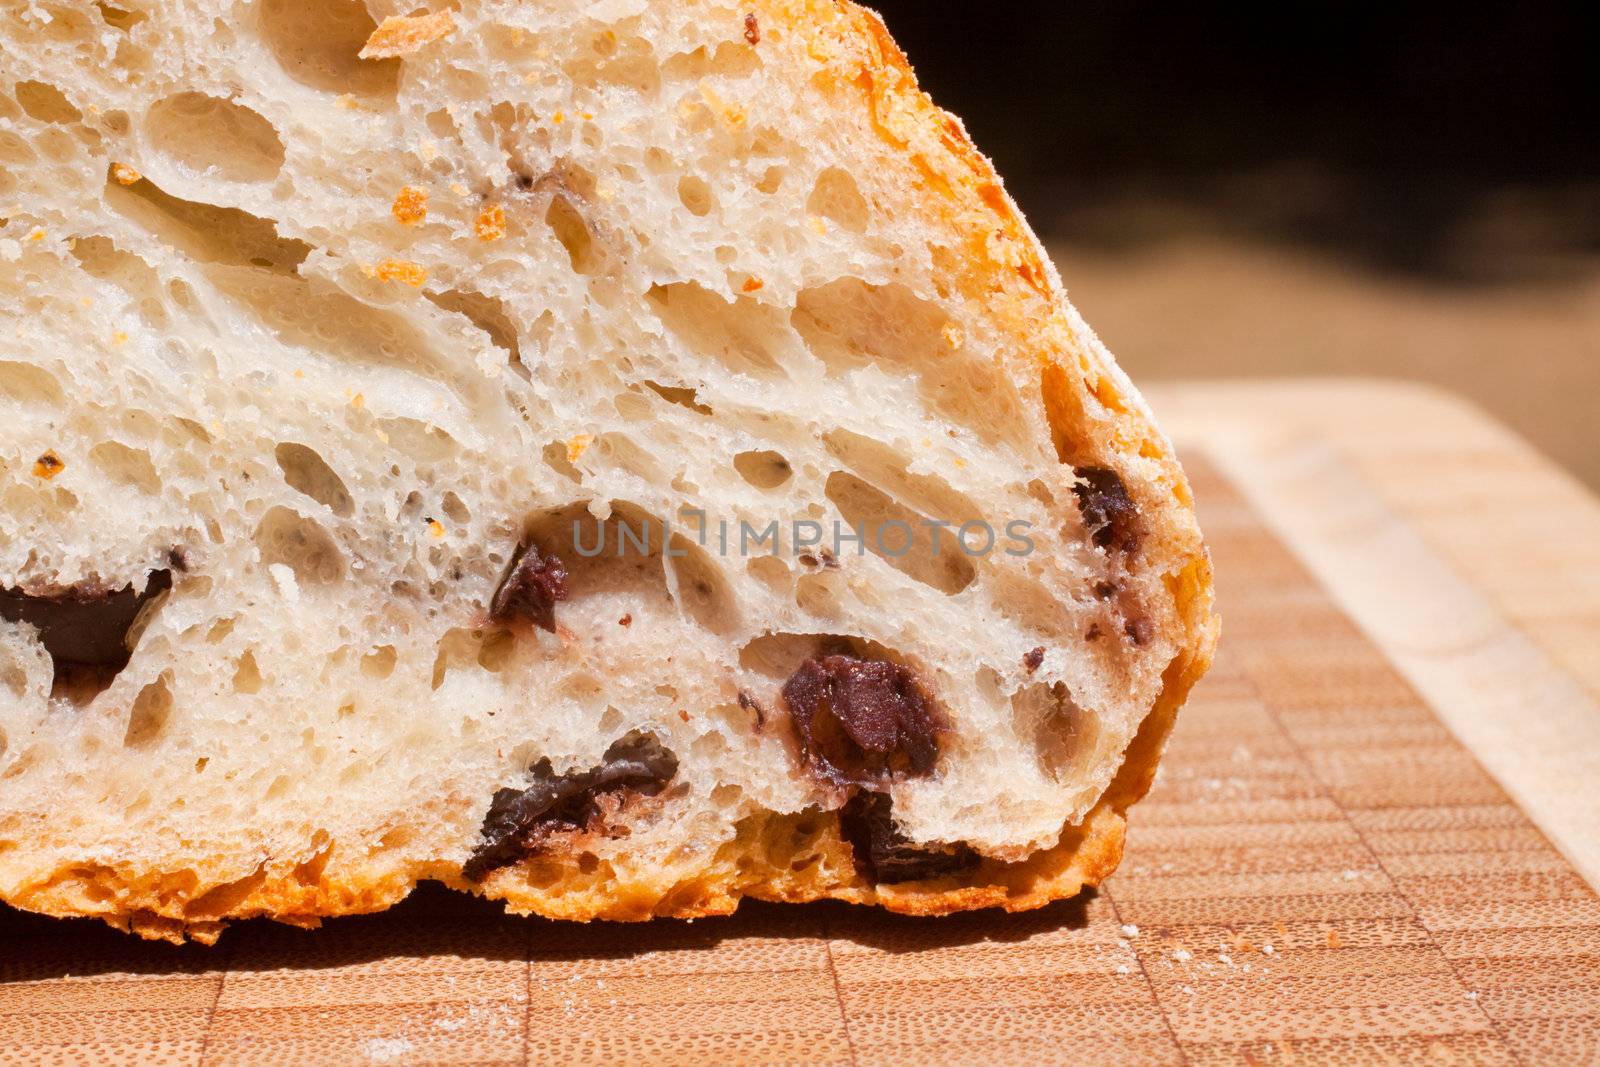 Fine artisan bread that is homemade by an incredible baker.